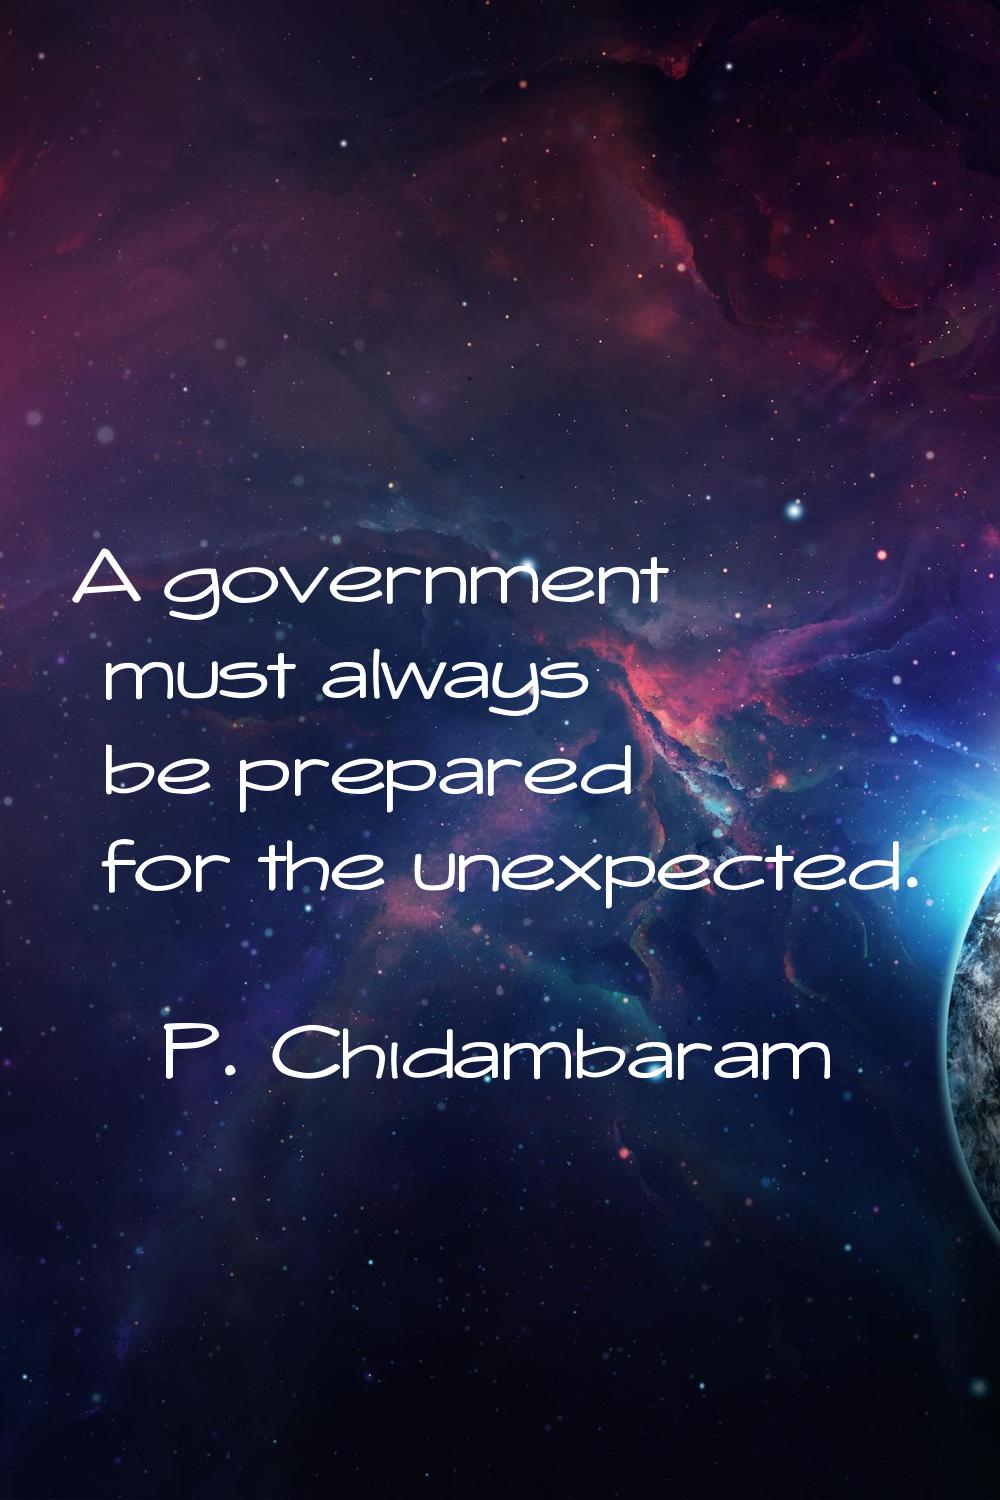 A government must always be prepared for the unexpected.